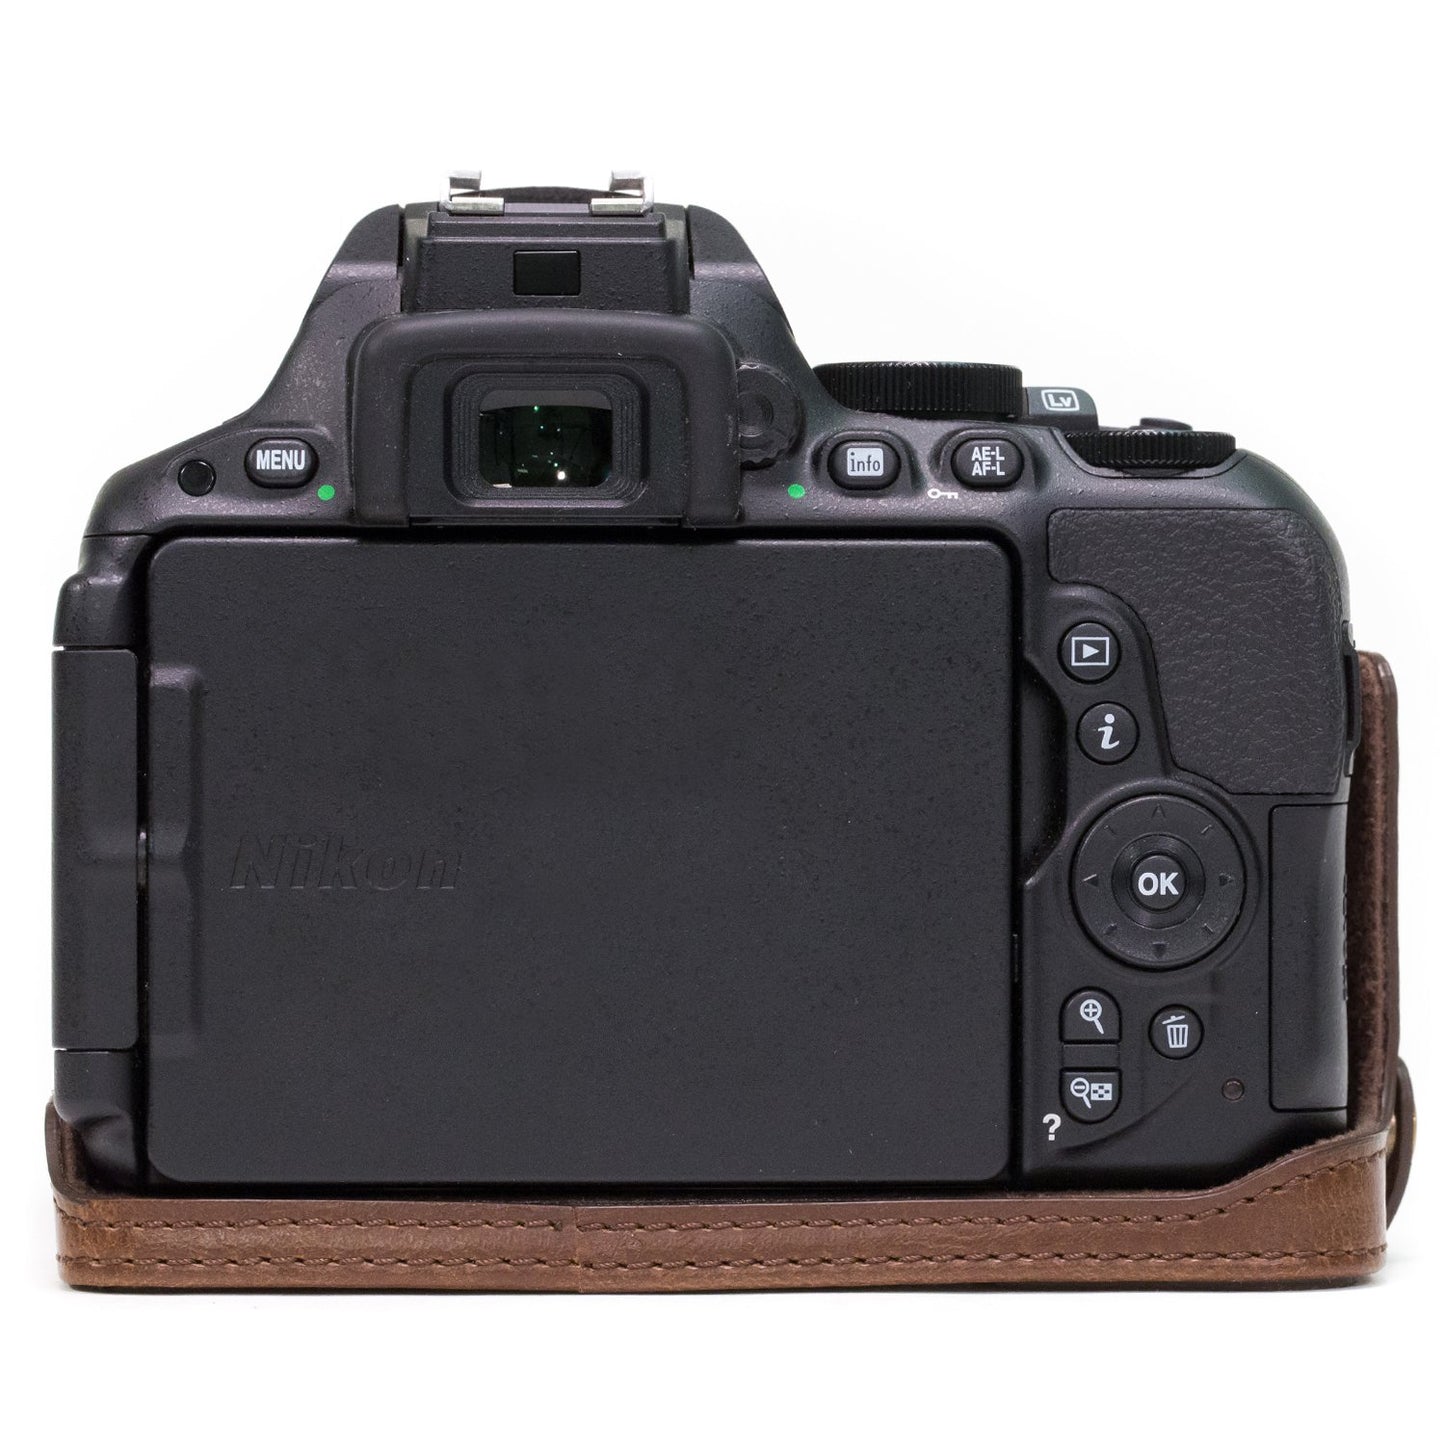 MegaGear Nikon D5600, D5500 Ever Ready Leather Camera Half Case and Strap, with Battery Access - Dark Brown - MG1171